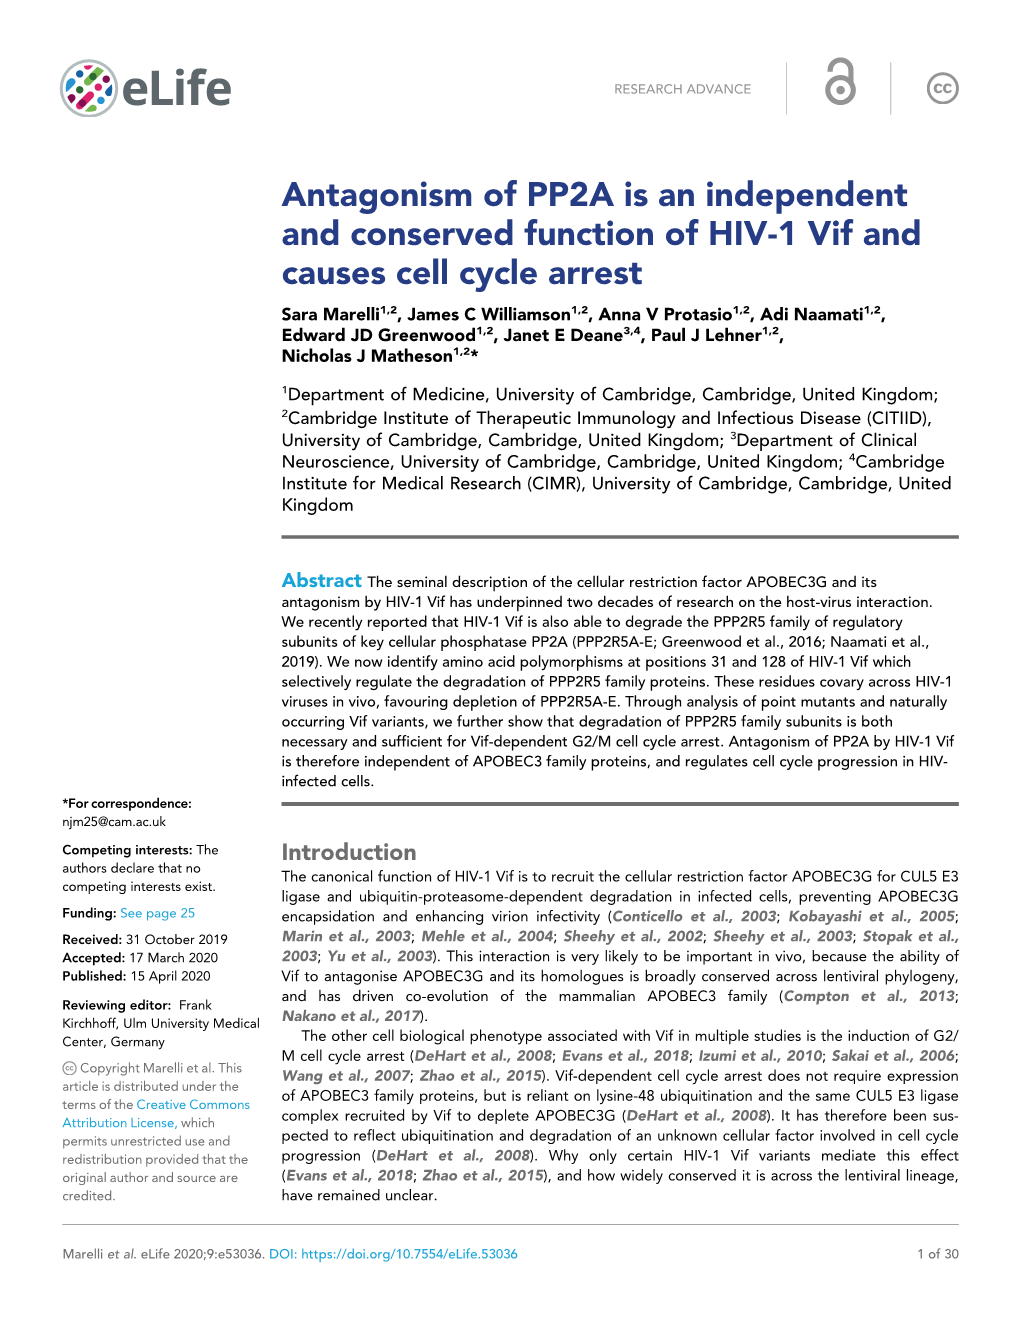 Antagonism of PP2A Is an Independent and Conserved